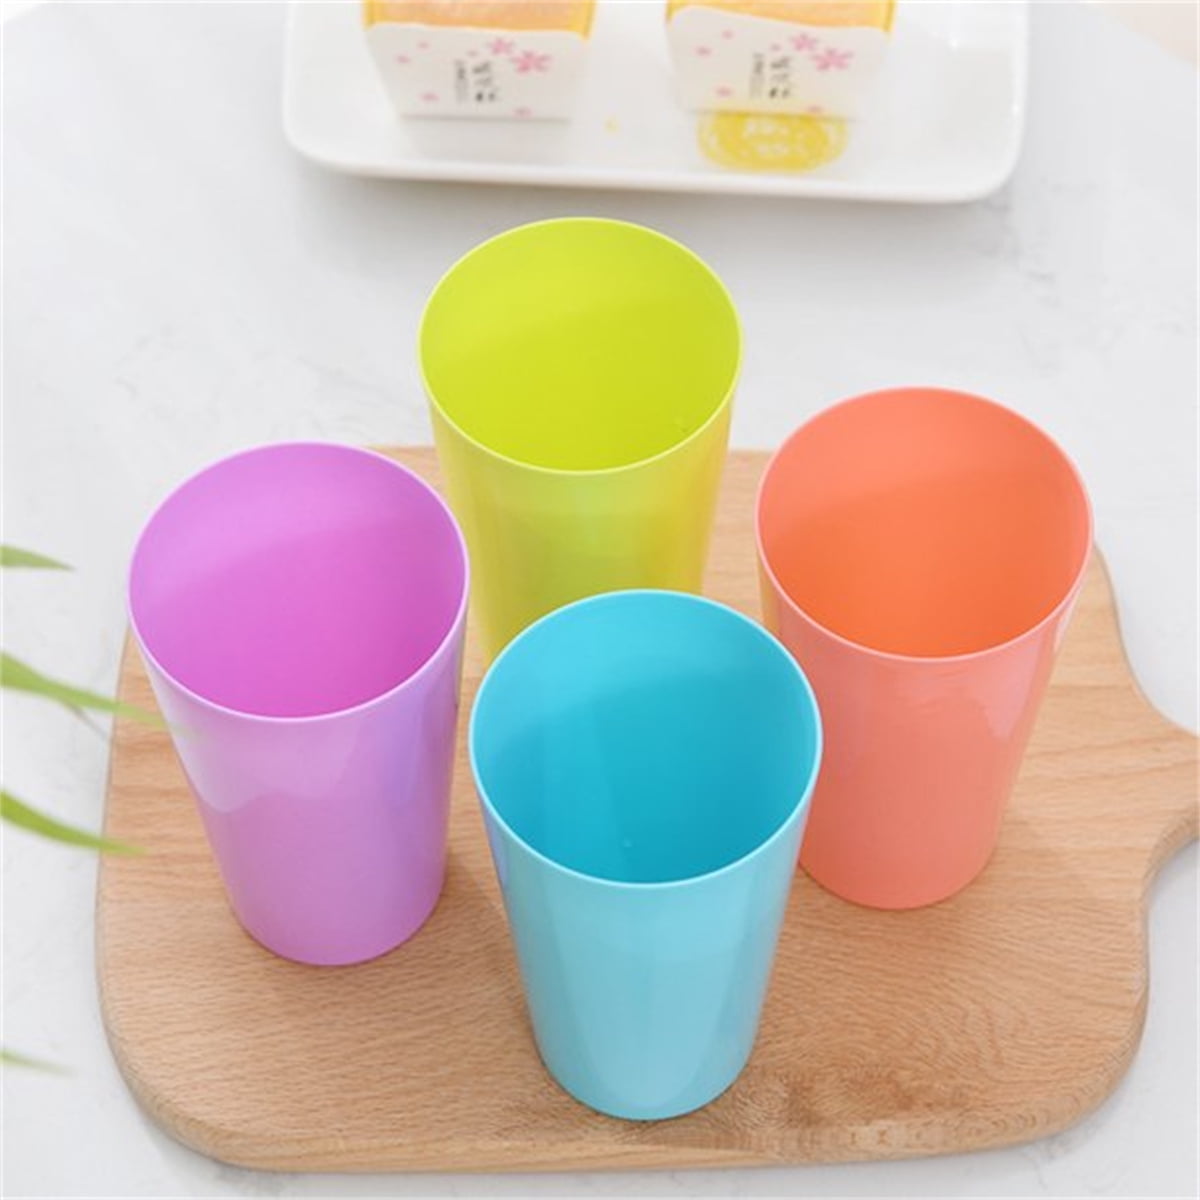 YUYUHUA Plastic Cups Reusable - Unbreakable Glasses Drinking  26 oz - Thick Wall Hard Dairy Tumblers set of 6 - BPA Free Dishwasher Safe  Kids Cup for Party Kitchen Camping